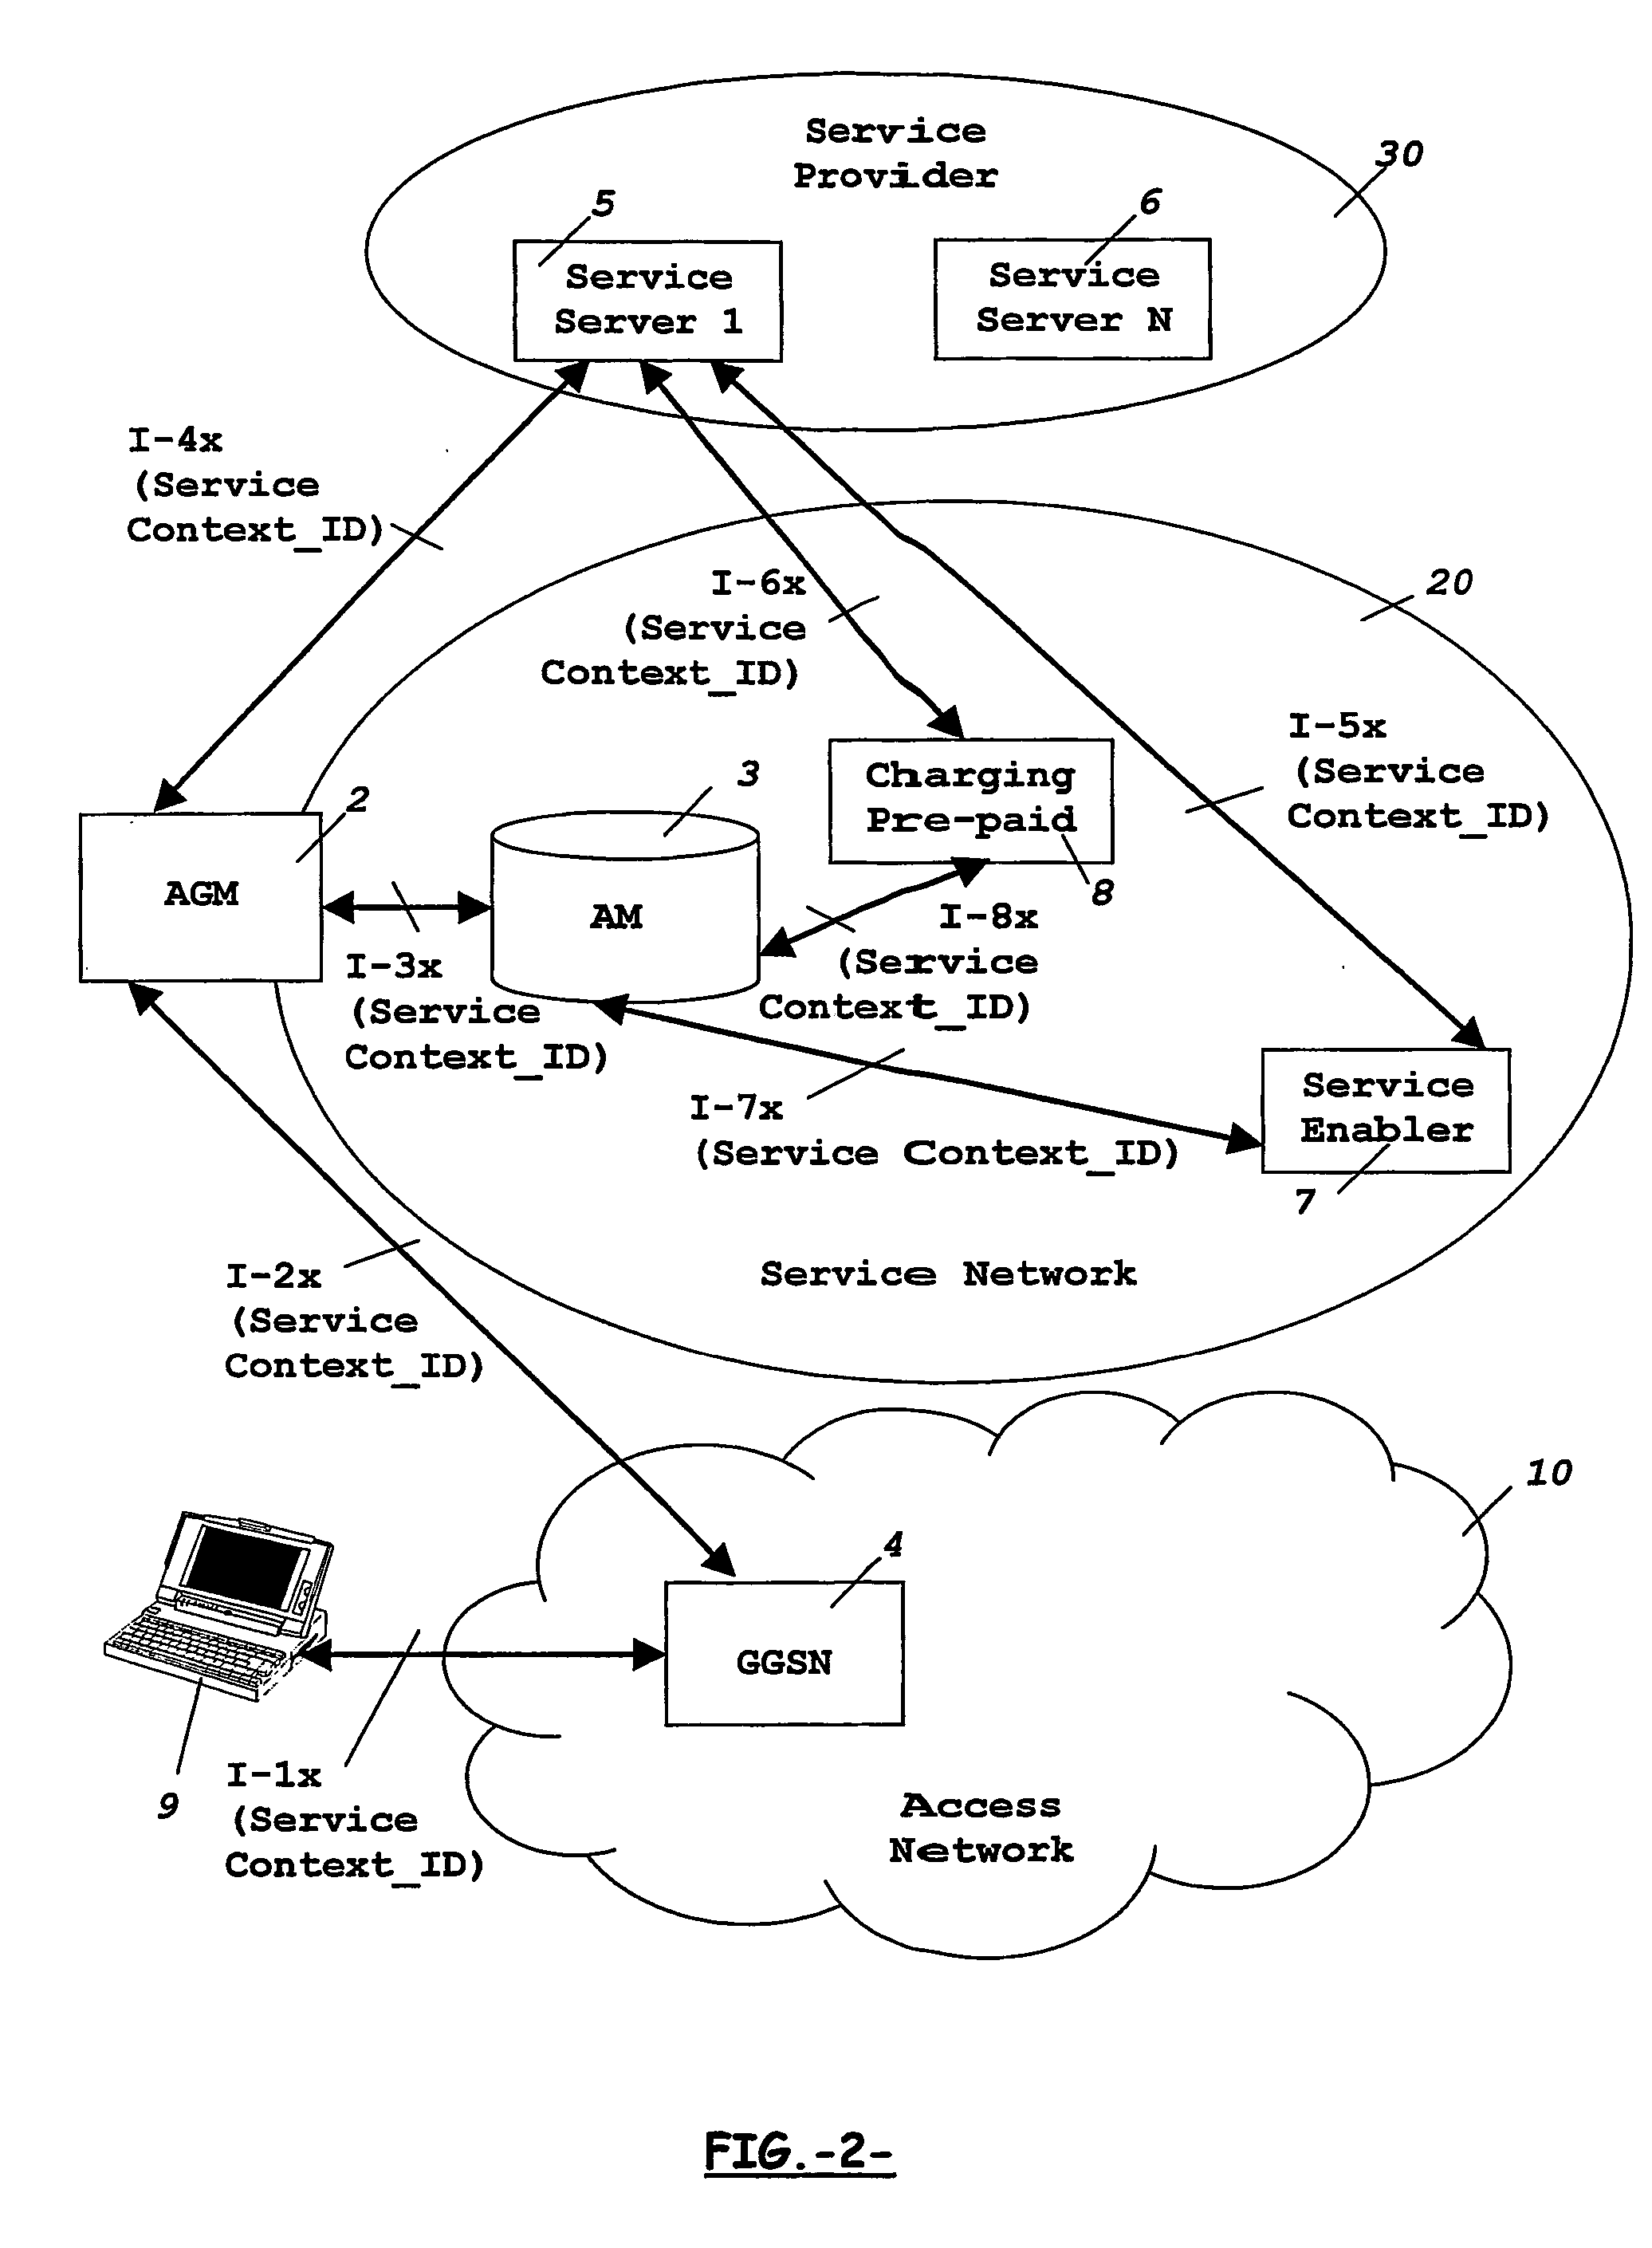 Means and method for controlling service progression between different domains